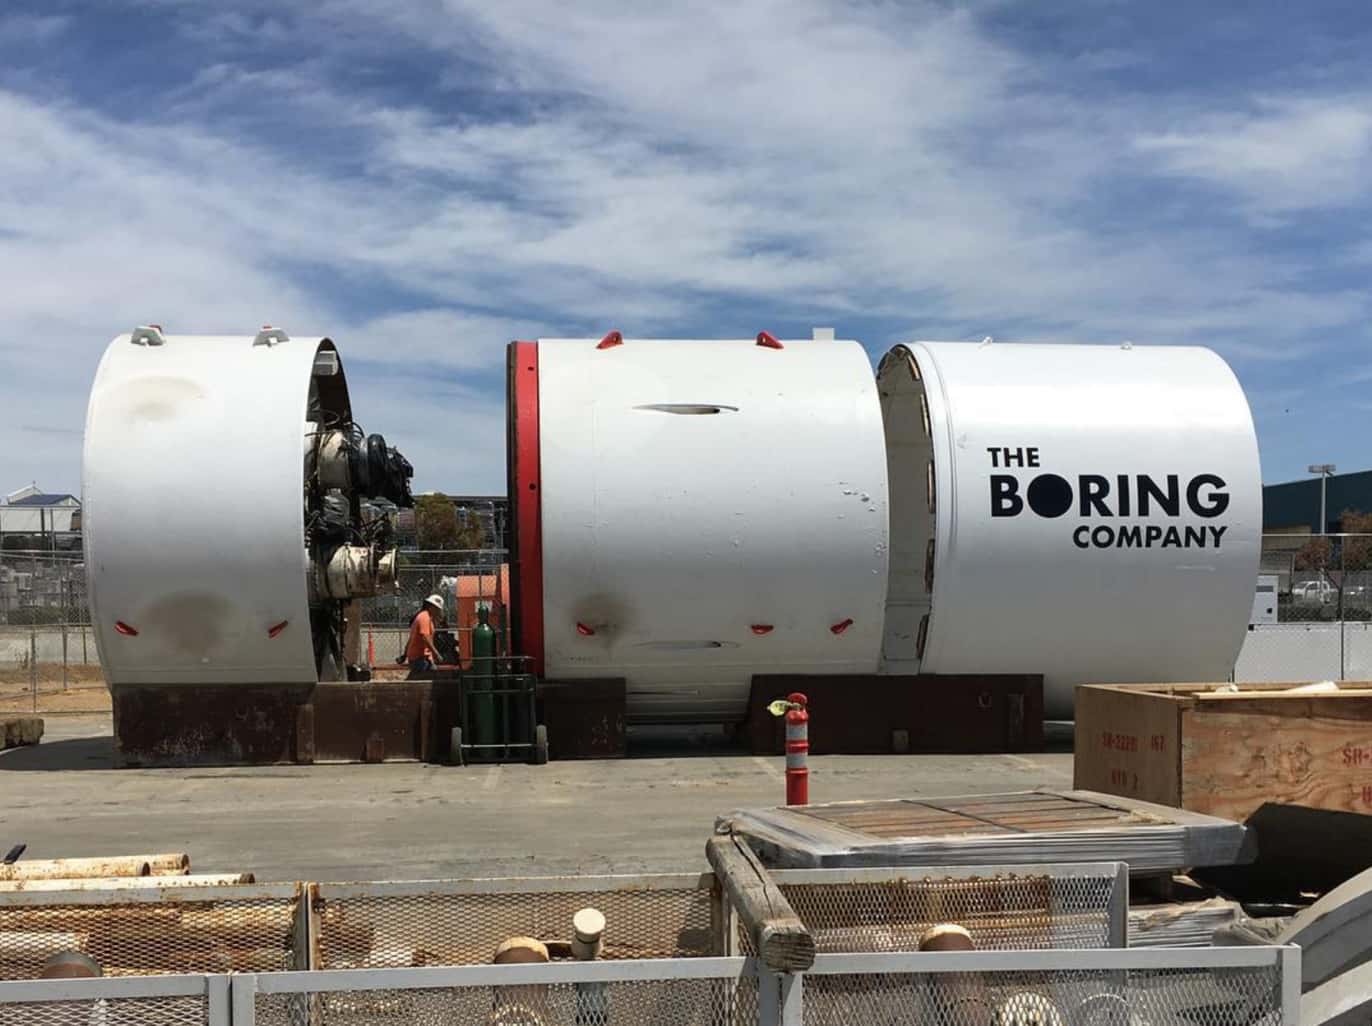 <p>Included in the long list of companies that Musk founded is “The Boring Company". The Boring Company isn’t as mundane as it sounds, though. The company was founded to assist SpaceX’s endeavors and already has a tool to do it with: The Tunnel Boring Machine, or TBM. The first TBM was named “Godot” after Beckett’s (arguably boring) play. The other machines are also going to be named after plays and poems.</p>